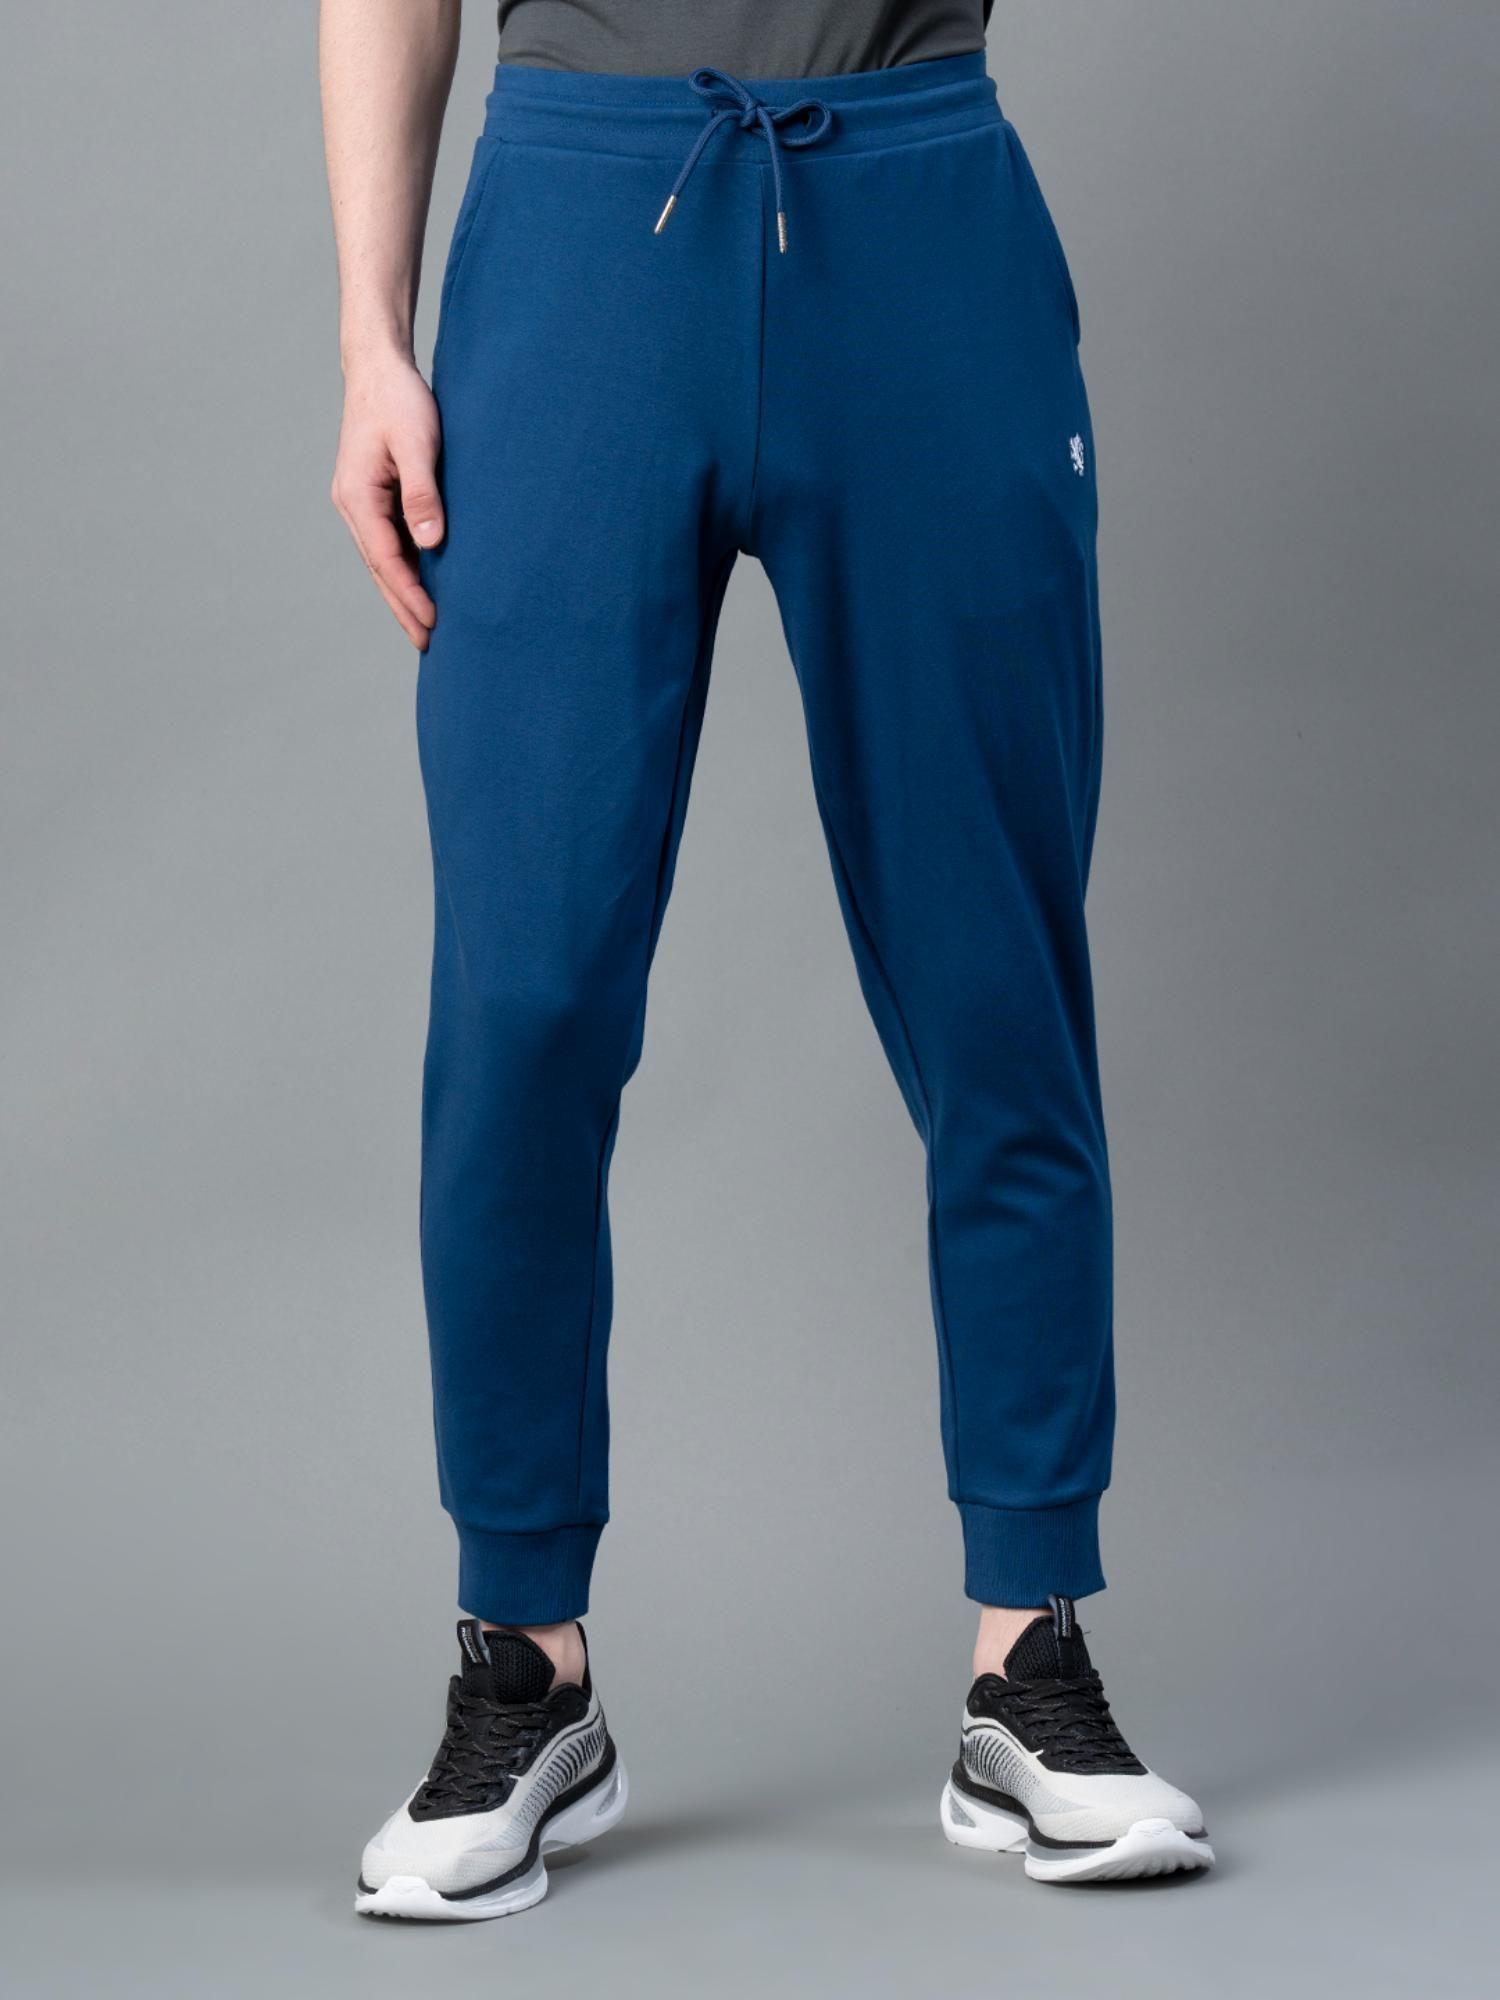 airforce blue solid cotton poly spandex men's joggers